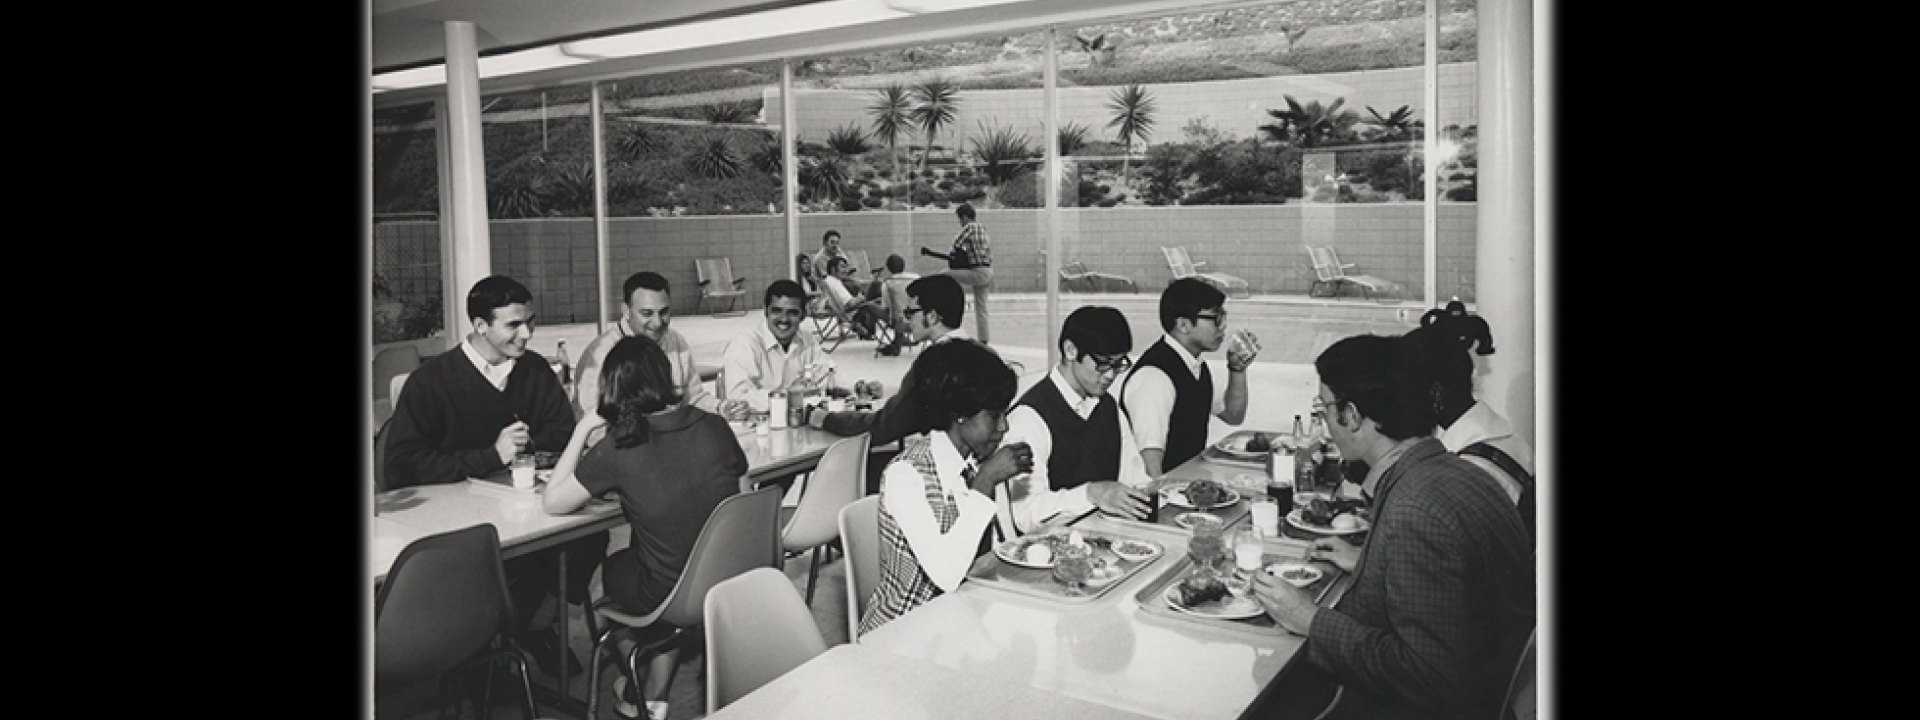 Cal State LA students in cafeteria during the 1970s